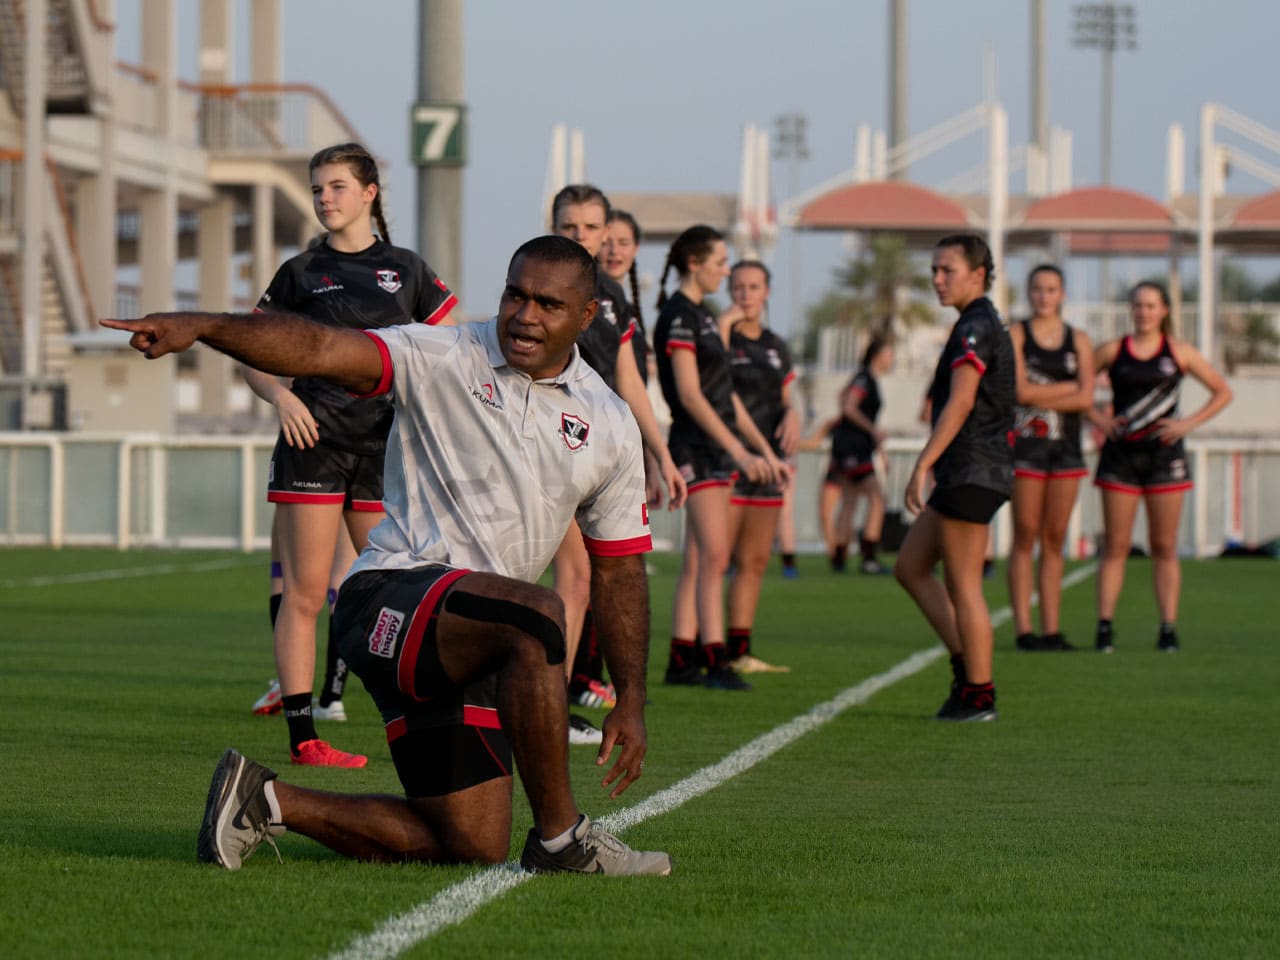 Dubai Exiles Ladies rugby coach gives instructions